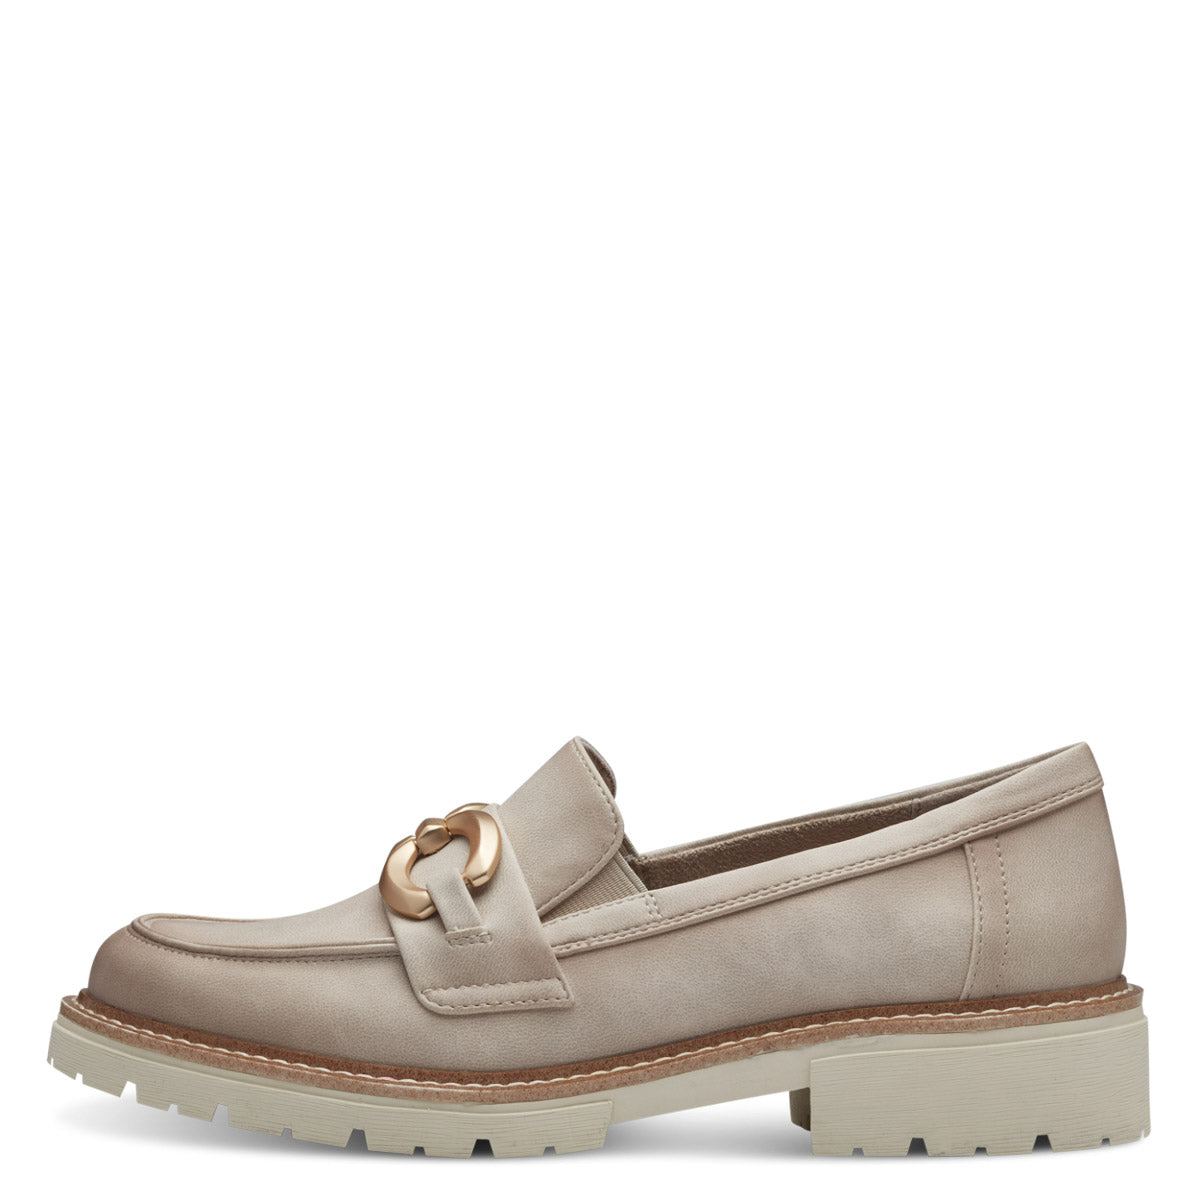 Front view of Jana Beige Vegan Loafers.